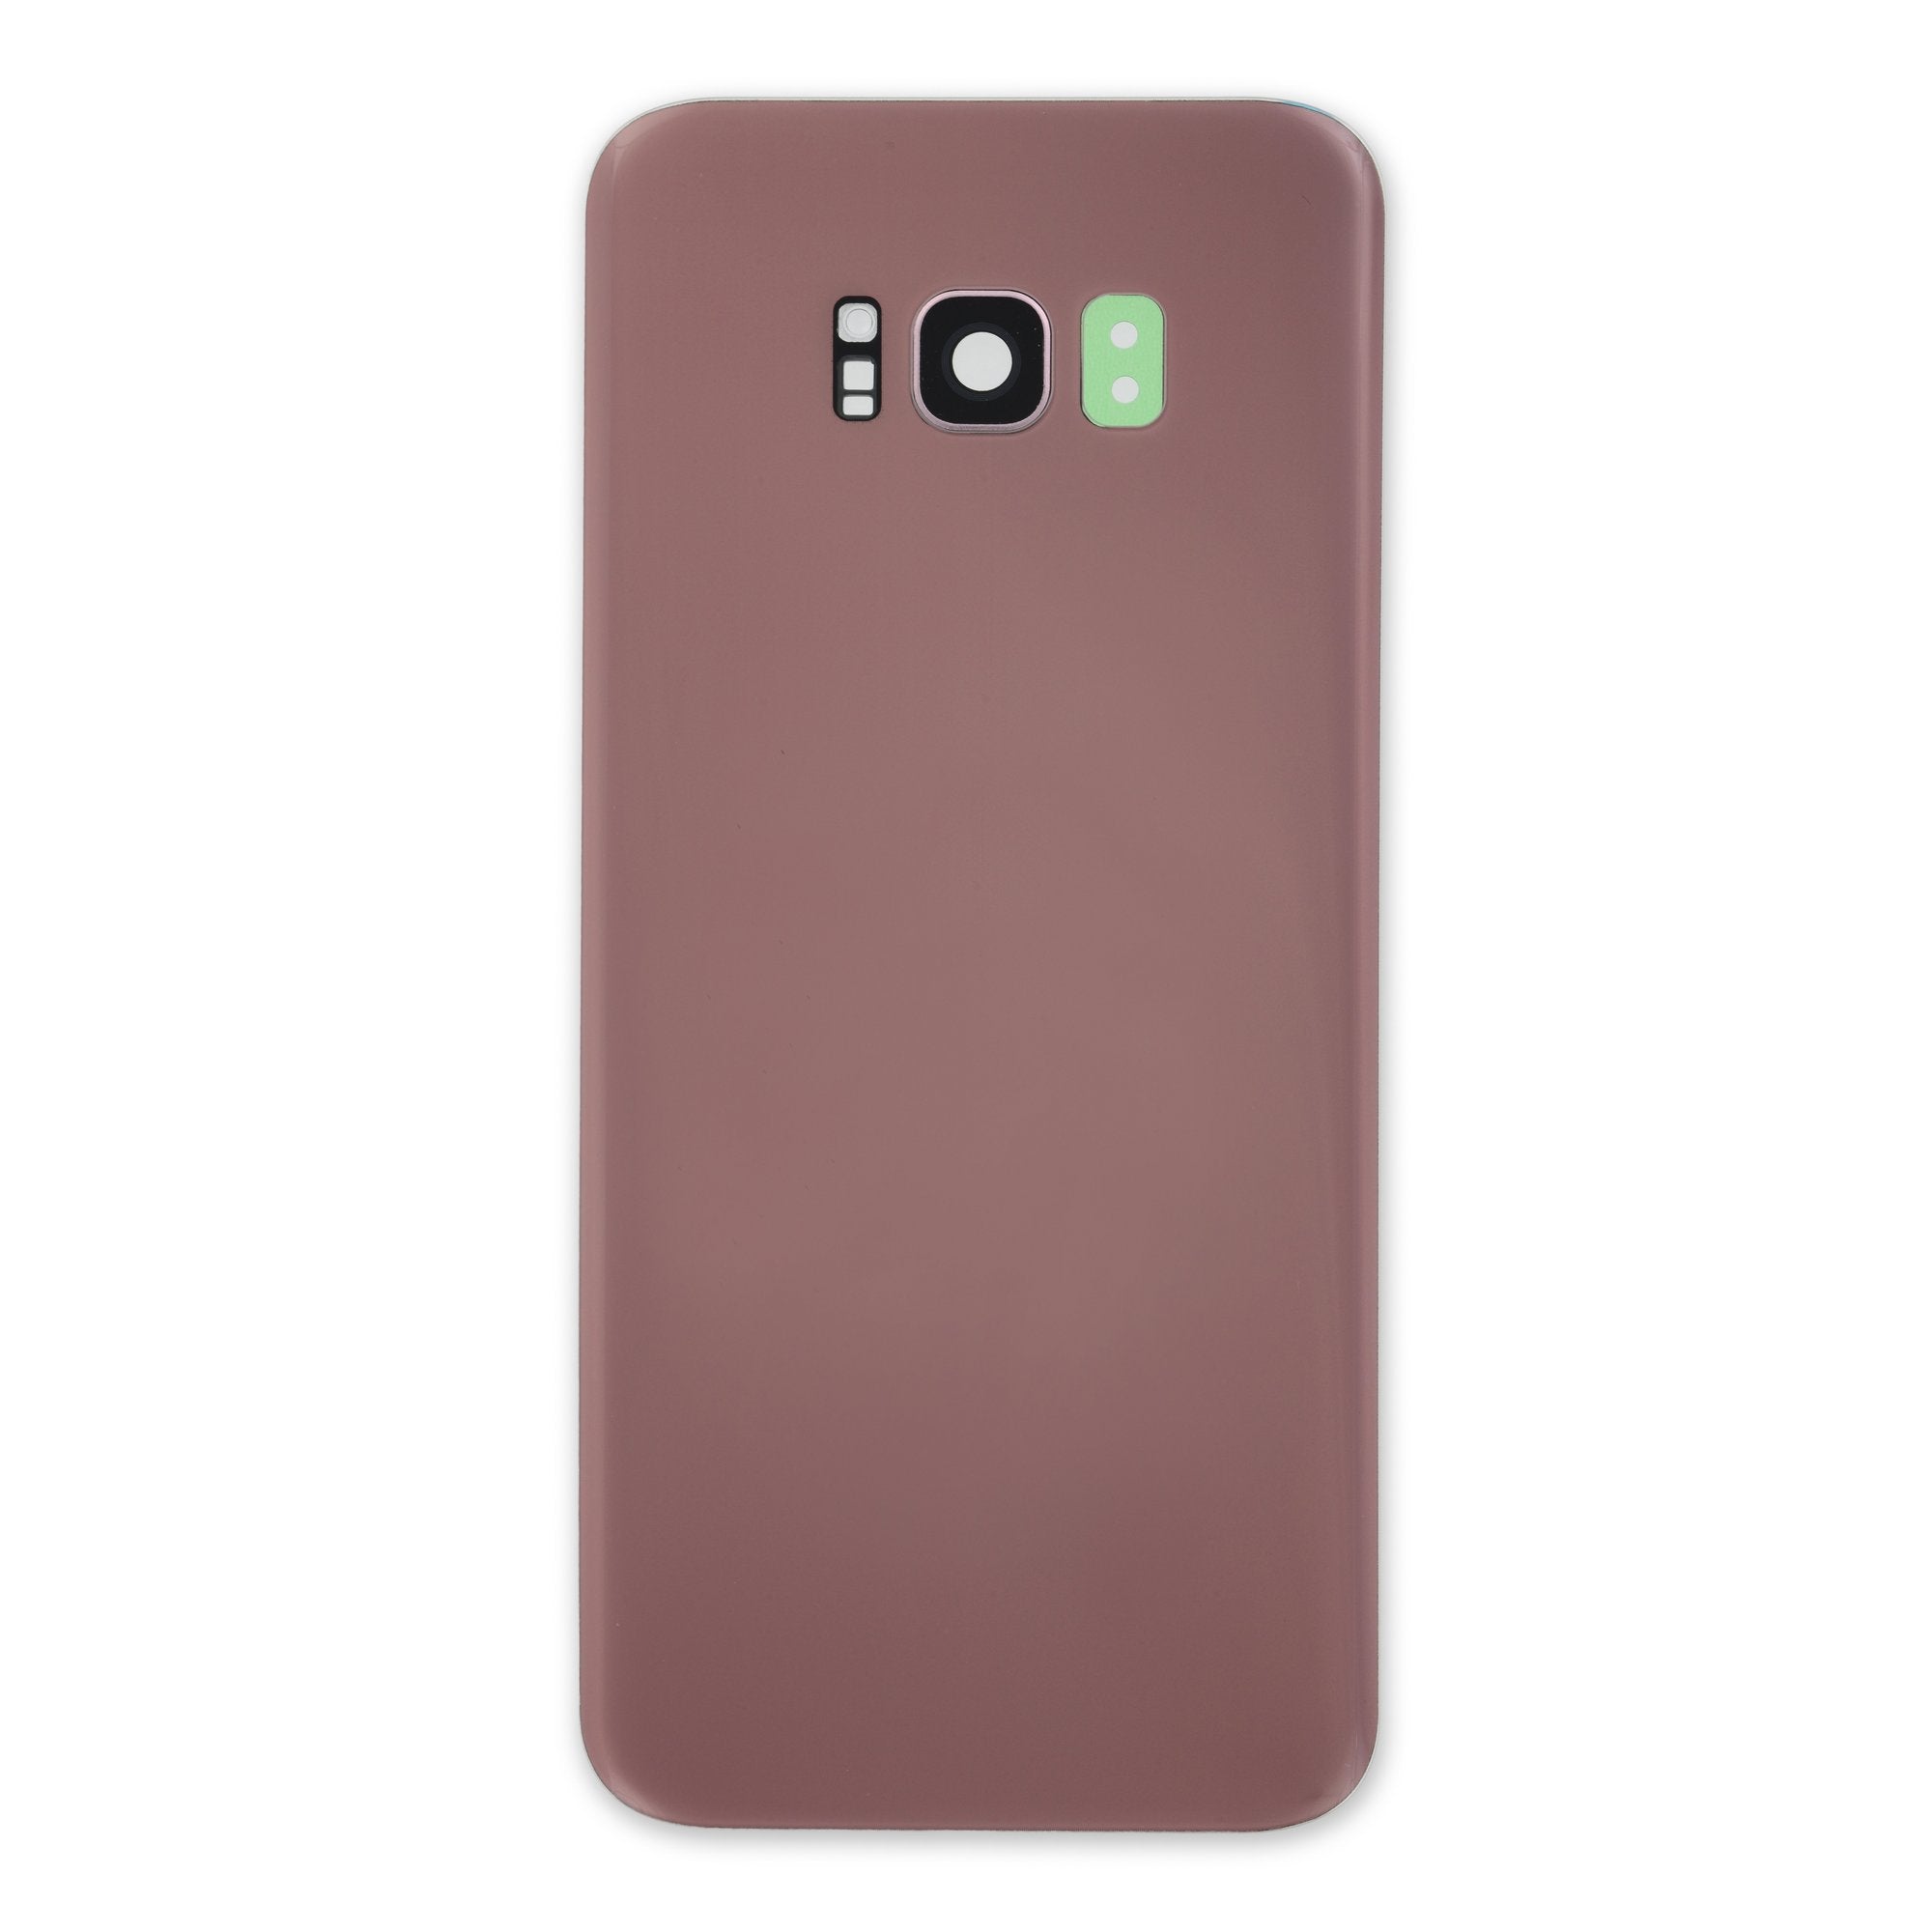 Galaxy S8+ Rear Glass Panel/Cover Rose Gold New Part Only